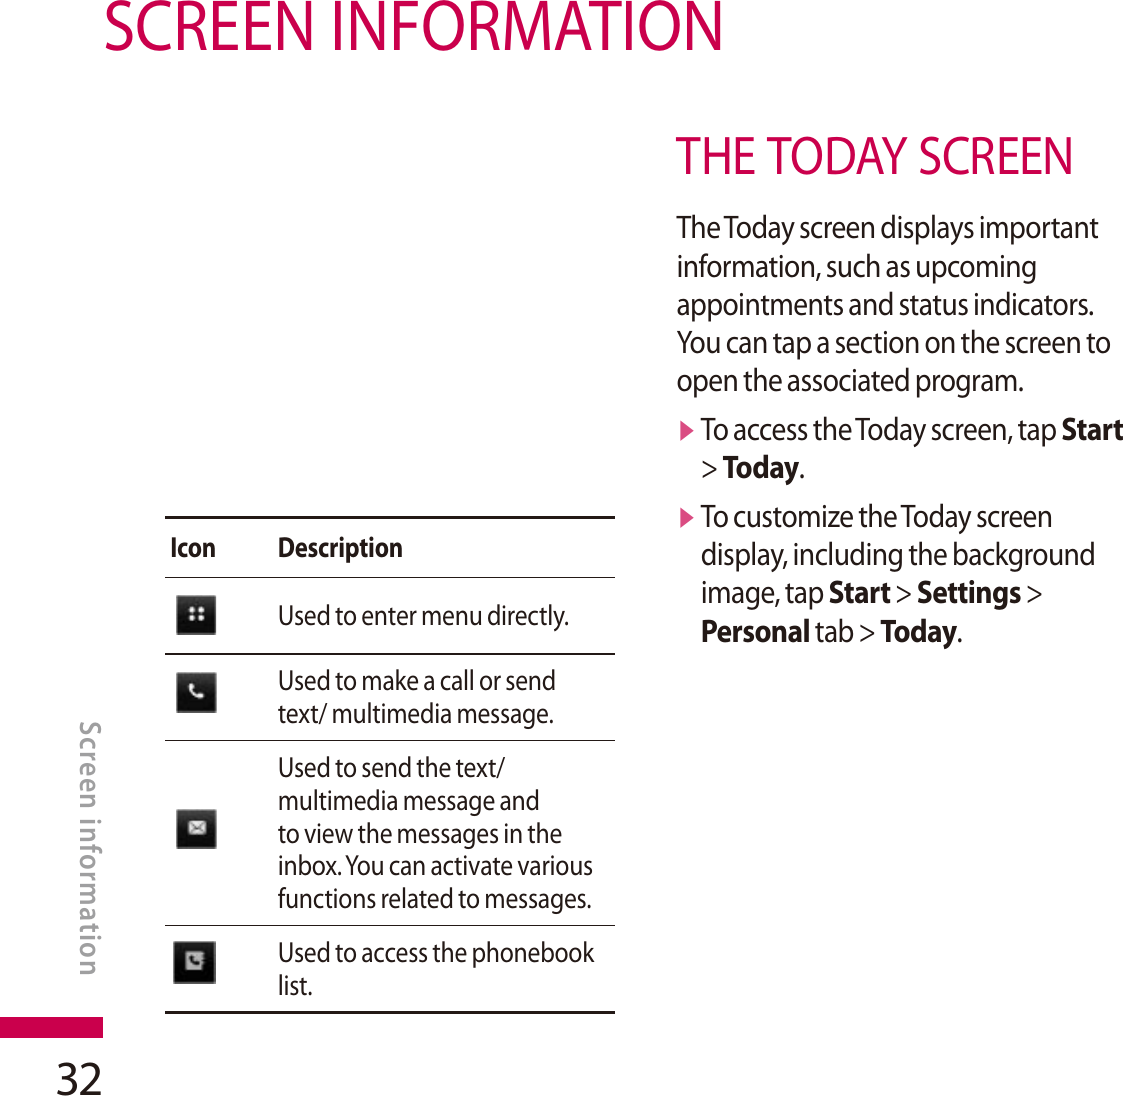 32SCREEN INFORMATIONScreen informationIcon DescriptionUsed to enter menu directly.Used to make a call or send text/ multimedia message.Used to send the text/ multimedia message and to view the messages in the inbox. You can activate various functions related to messages.Used to access the phonebook list.THE TODAY SCREENThe Today screen displays important information, such as upcoming appointments and status indicators. You can tap a section on the screen to open the associated program.vTo access the Today screen, tap Start&gt; Today.vTo customize the Today screen display, including the background image, tap Start &gt; Settings &gt; Personal tab &gt; Today.